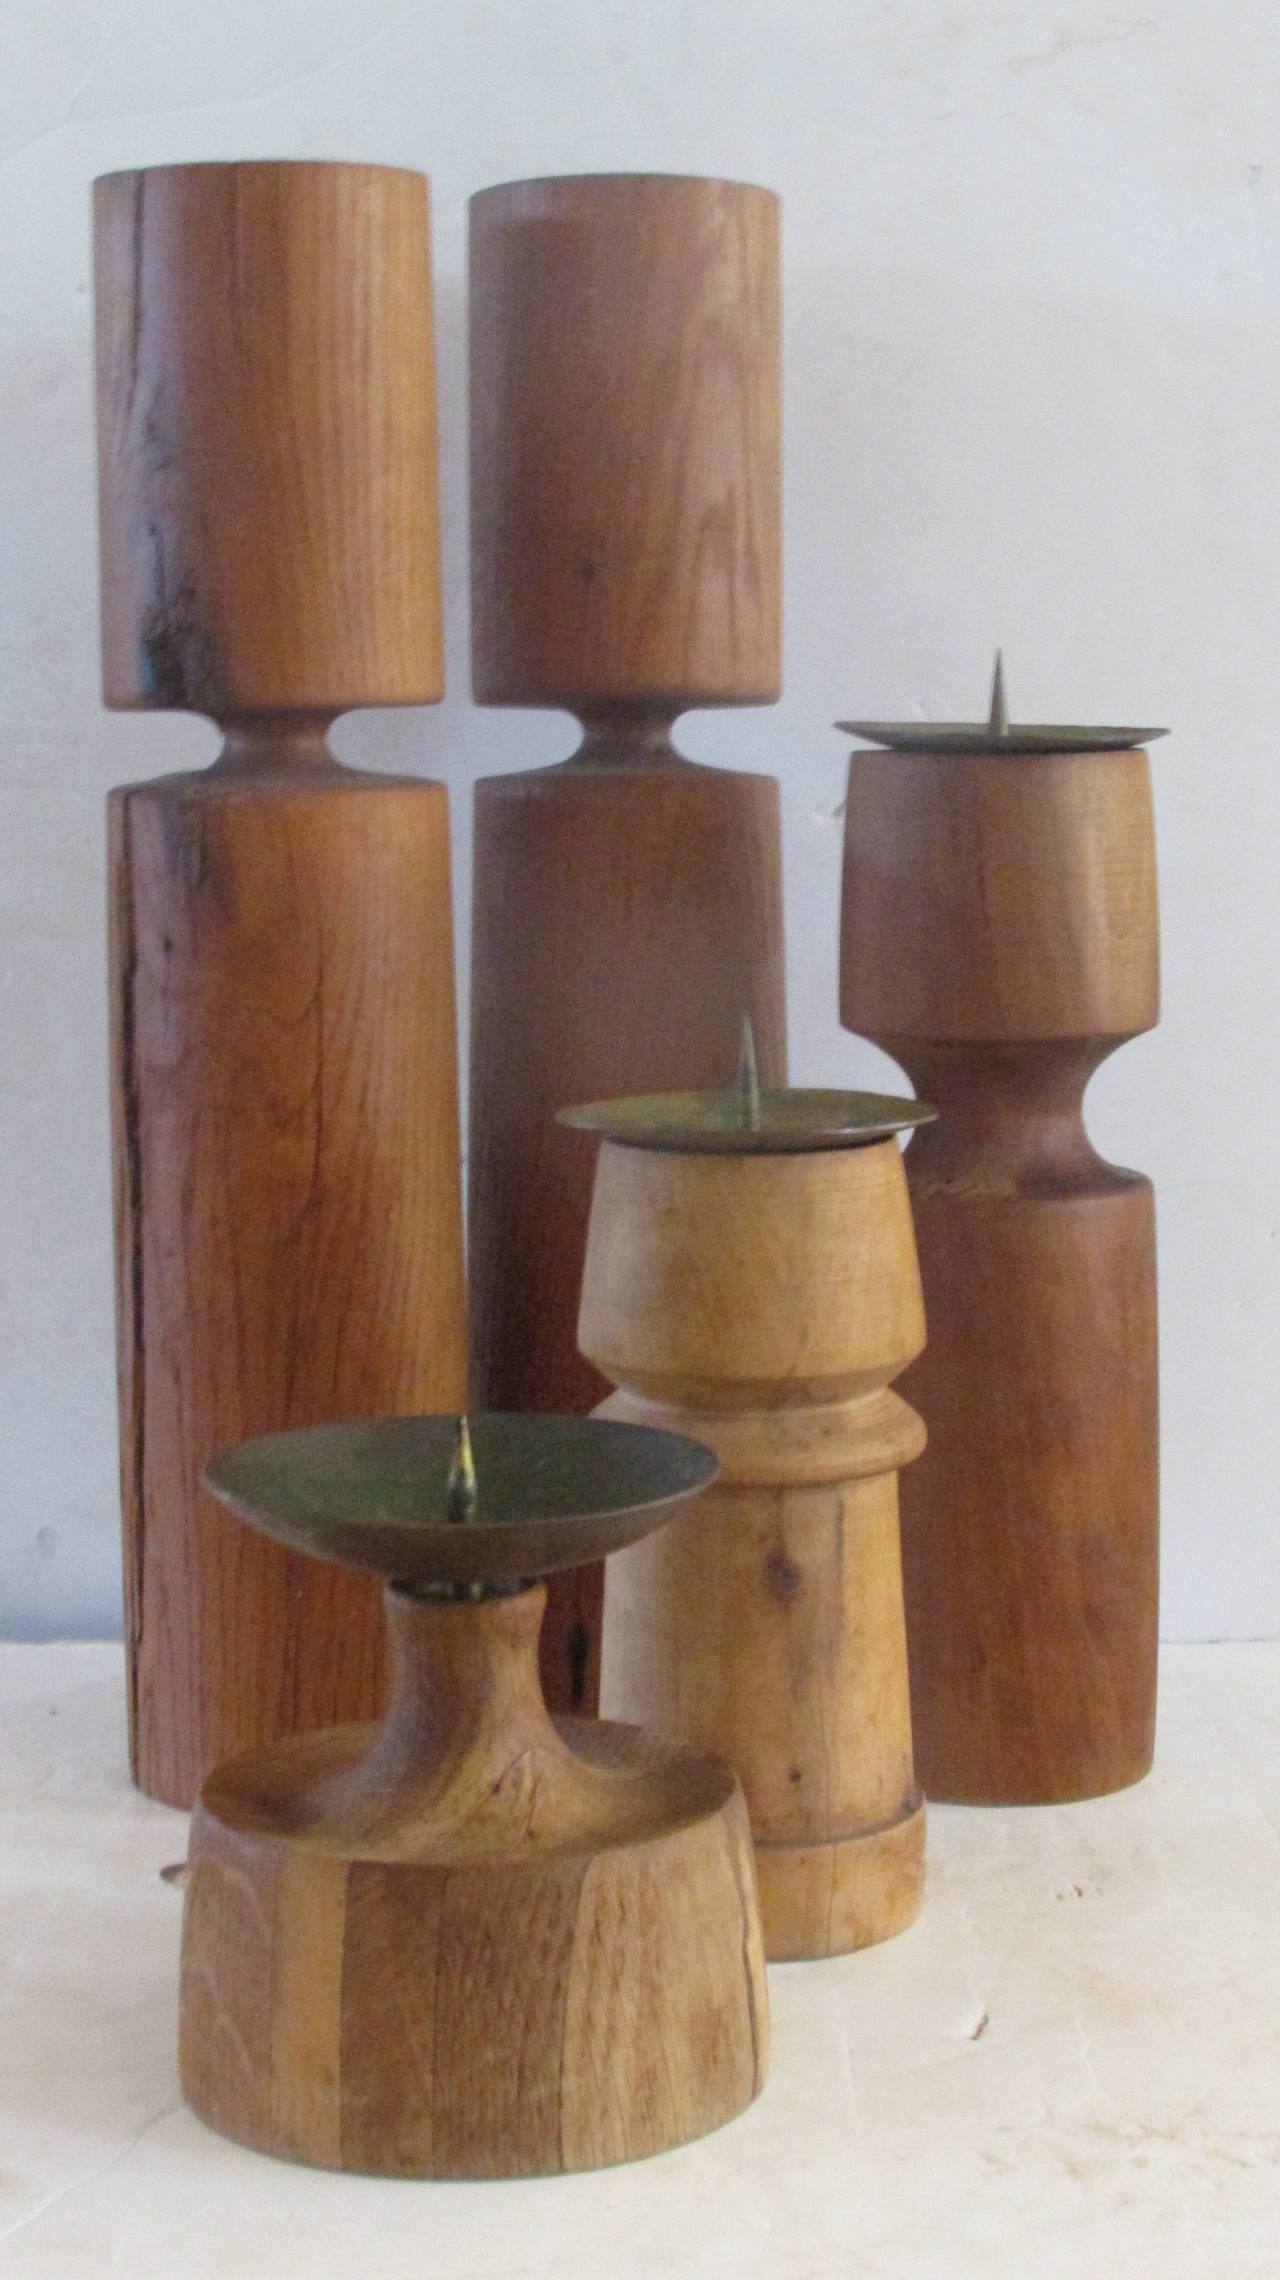 A group of five turned wood Danish modern style candlesticks by sculptor and metalsmith Paul A.Tarantino (1927-2014) Cranbrook Academy of Art / Buffalo State University / Rochester Institute of Technology School for American Craftsmen and jewelry